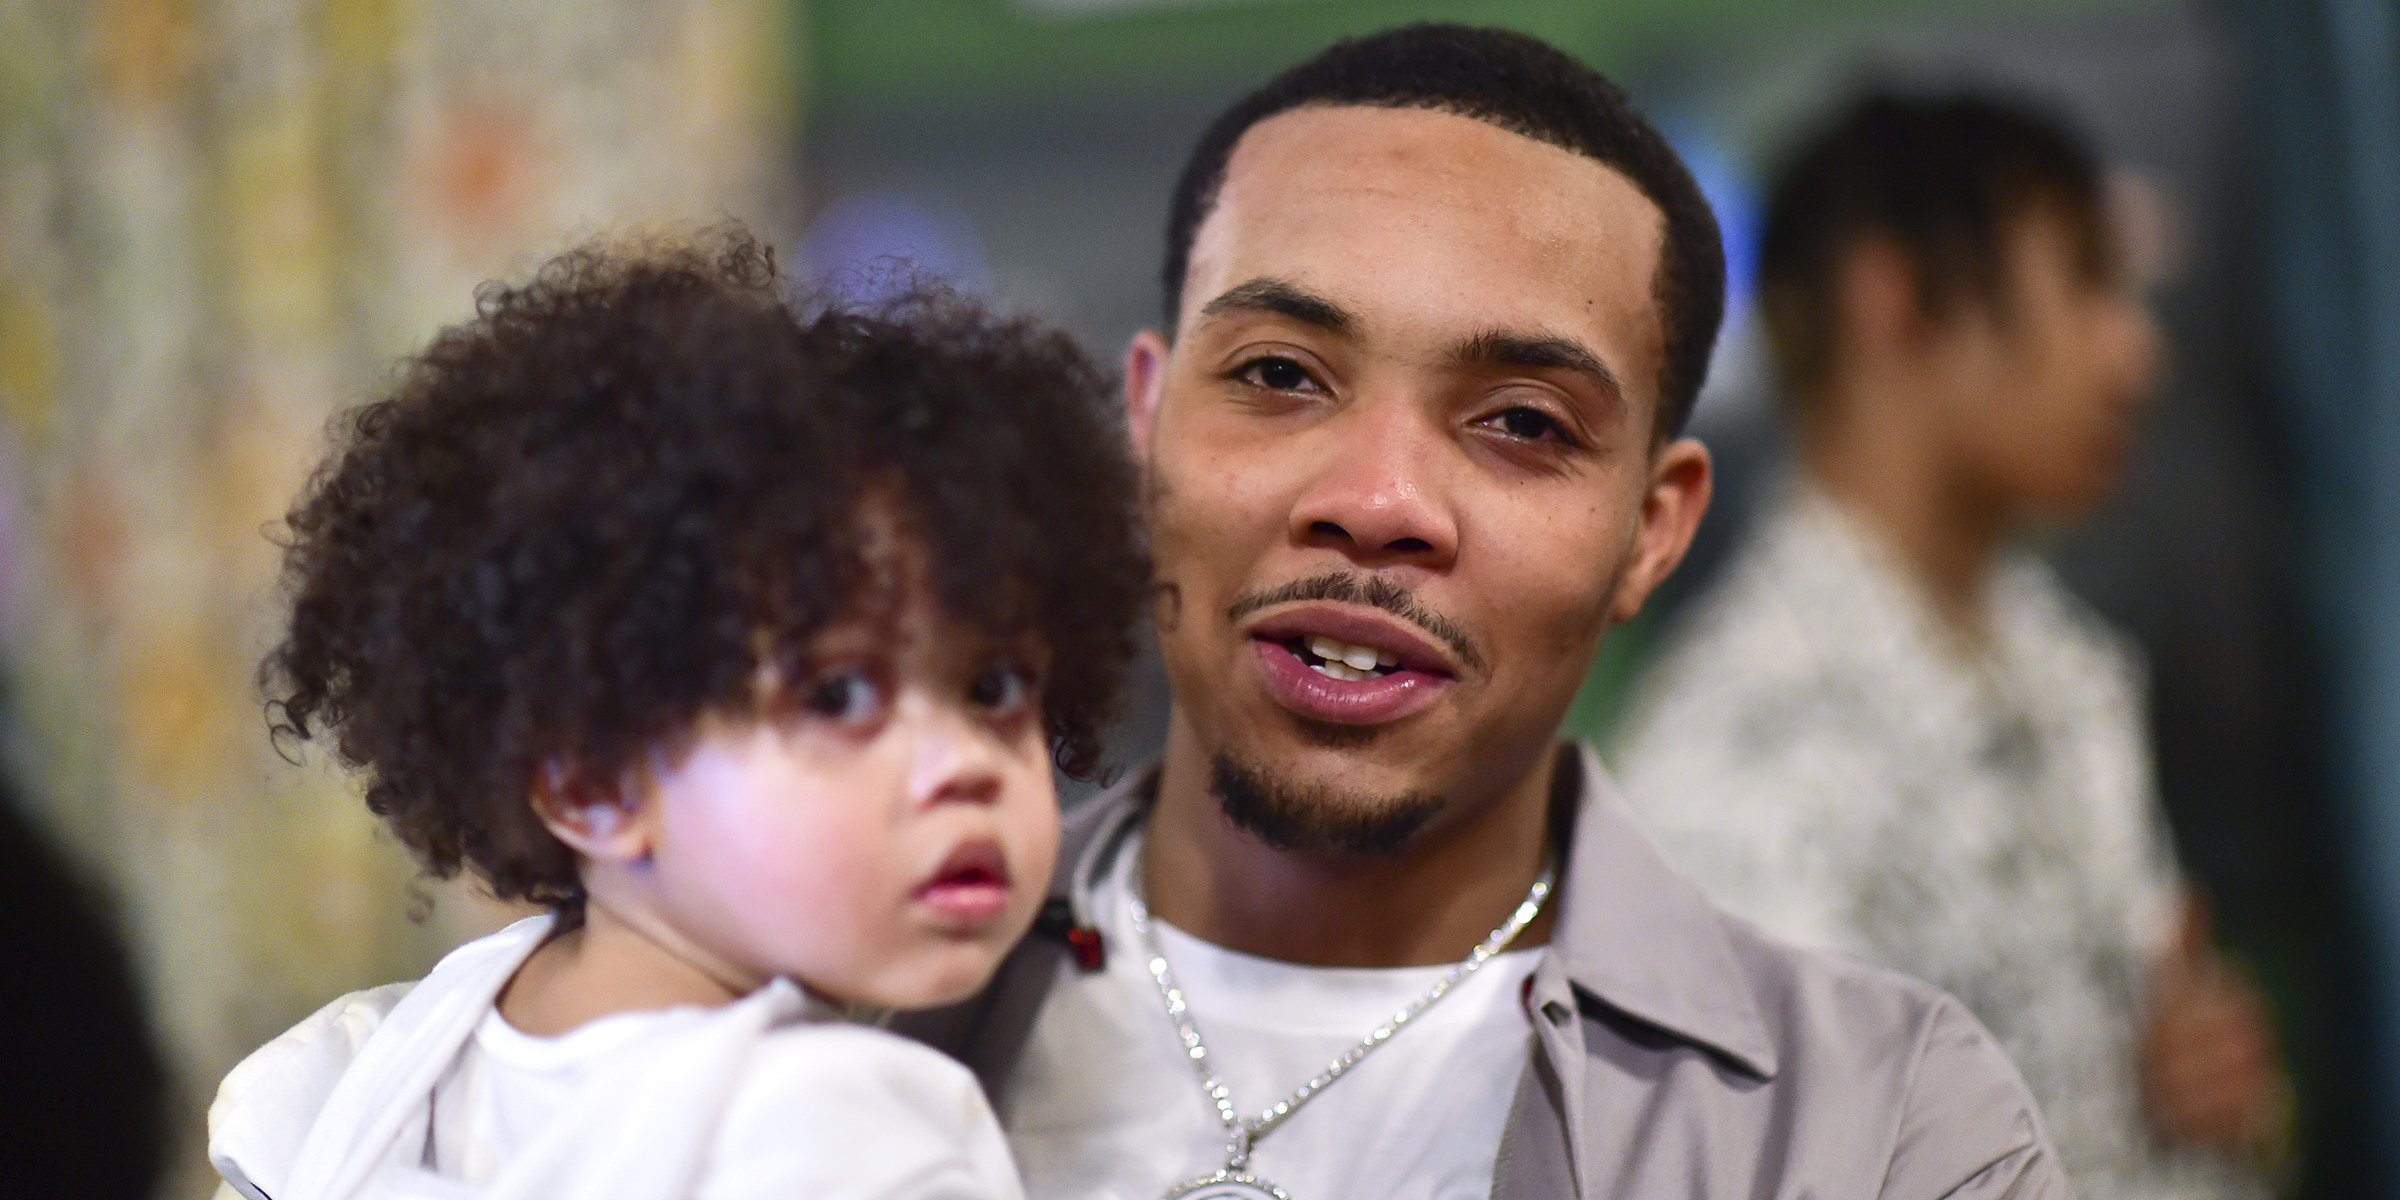 Yosohn and G Herbo, 2020 | Source: Getty Images